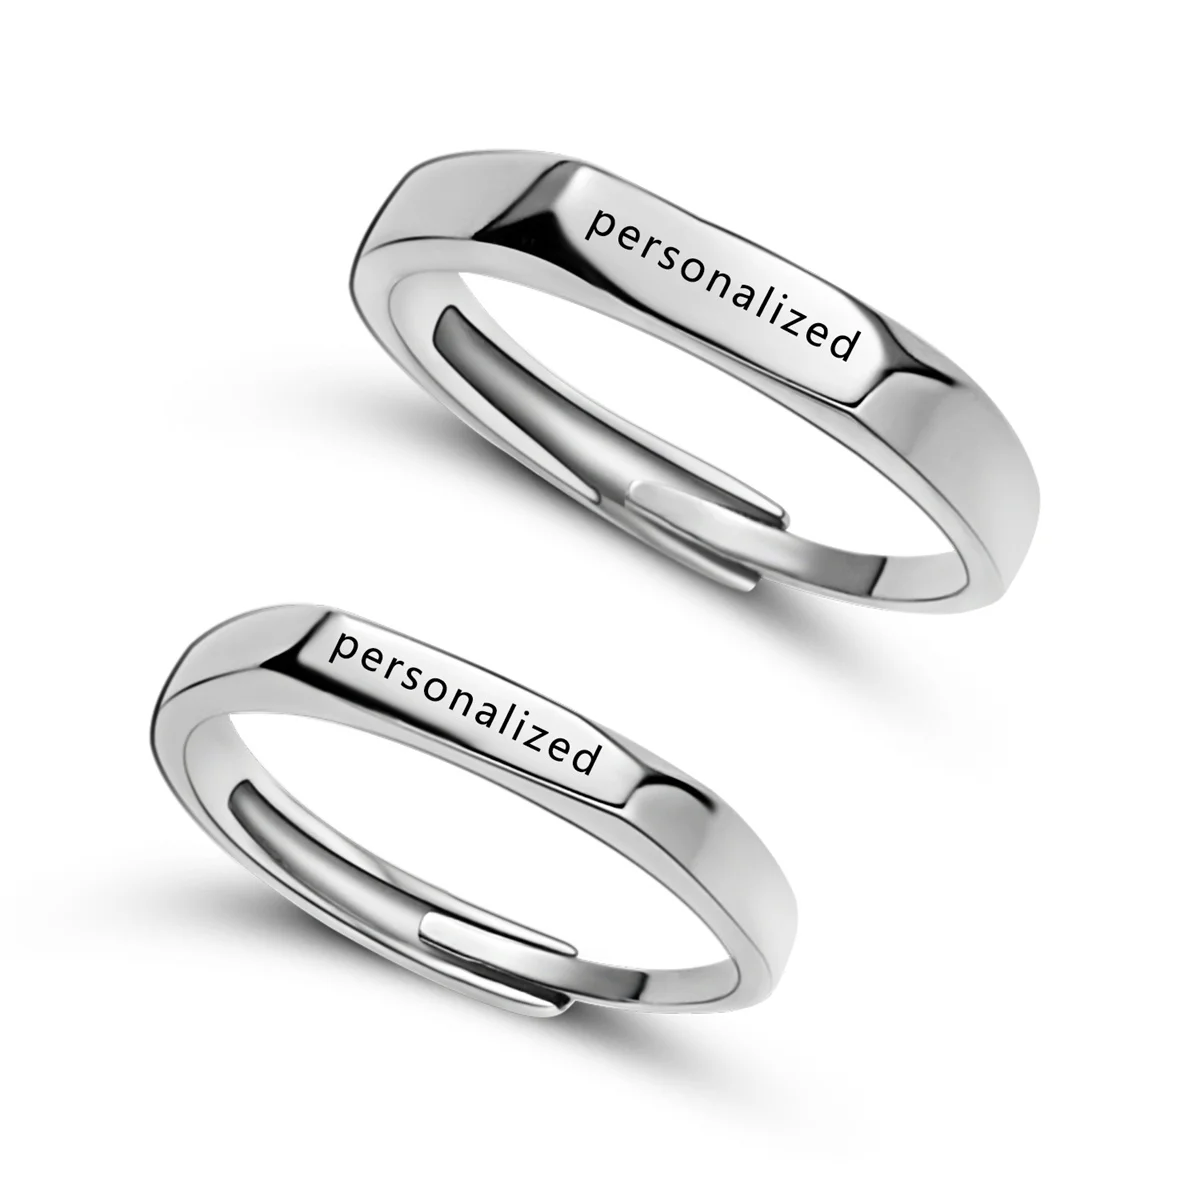 Personalized Custom Name Text Couple Rings For Women Men Stainless Steel Engraved Date Opening Ring Anniversary Gifts Jewelry acrylic hexagon box custom your memorial photo print text engagement proposal ring holder wedding rings bearer transparent boxes